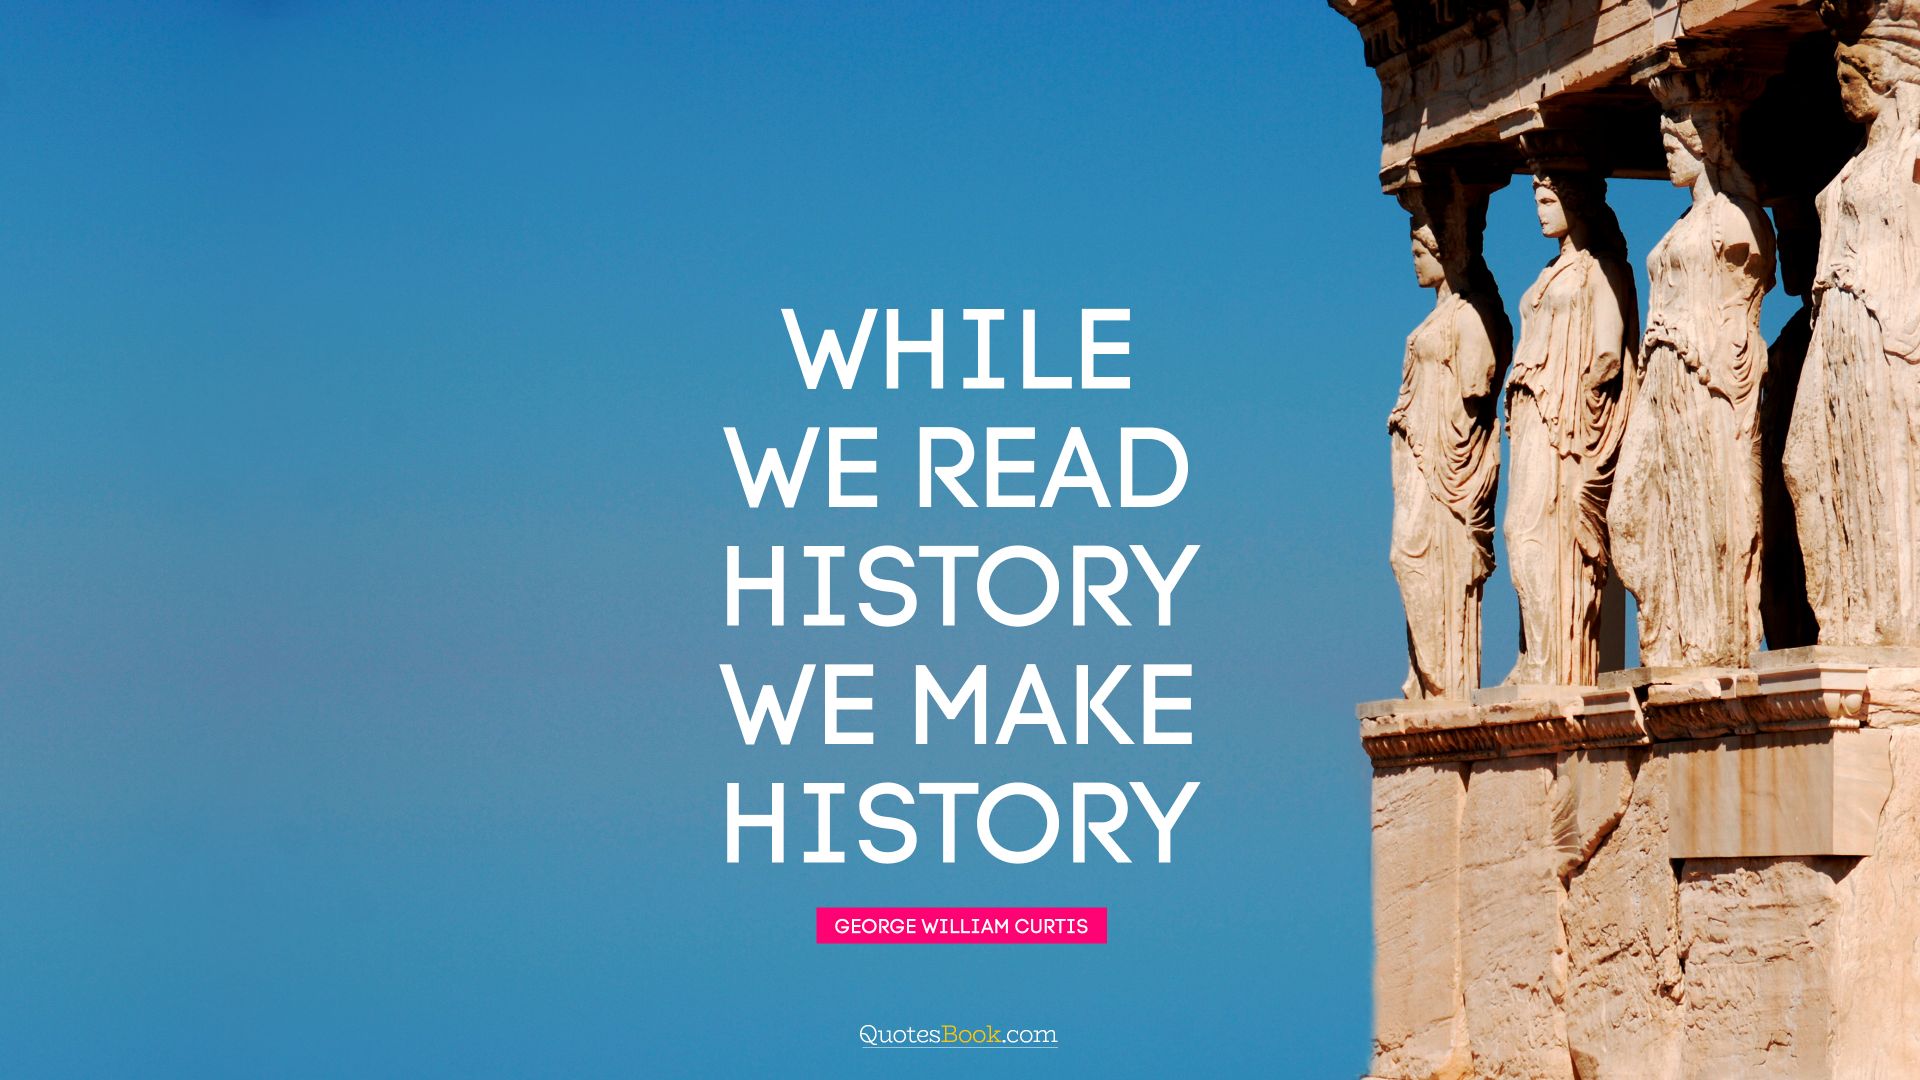 While we read history we make history. - Quote by George William Curtis